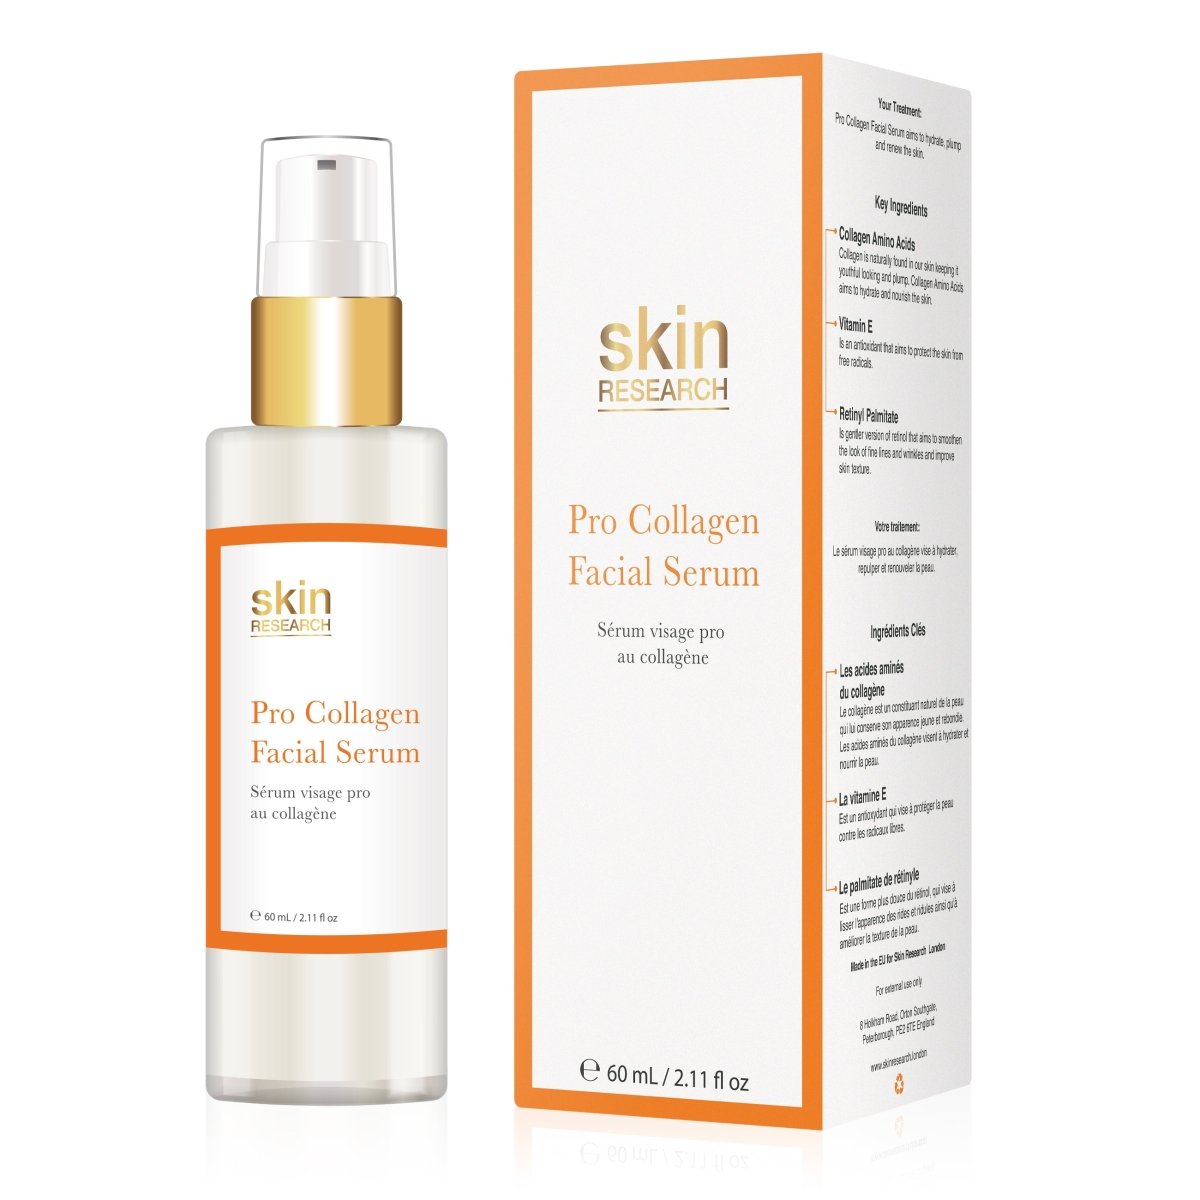 Pro Collagen Facial and Eye Treatment Kit - skinChemists